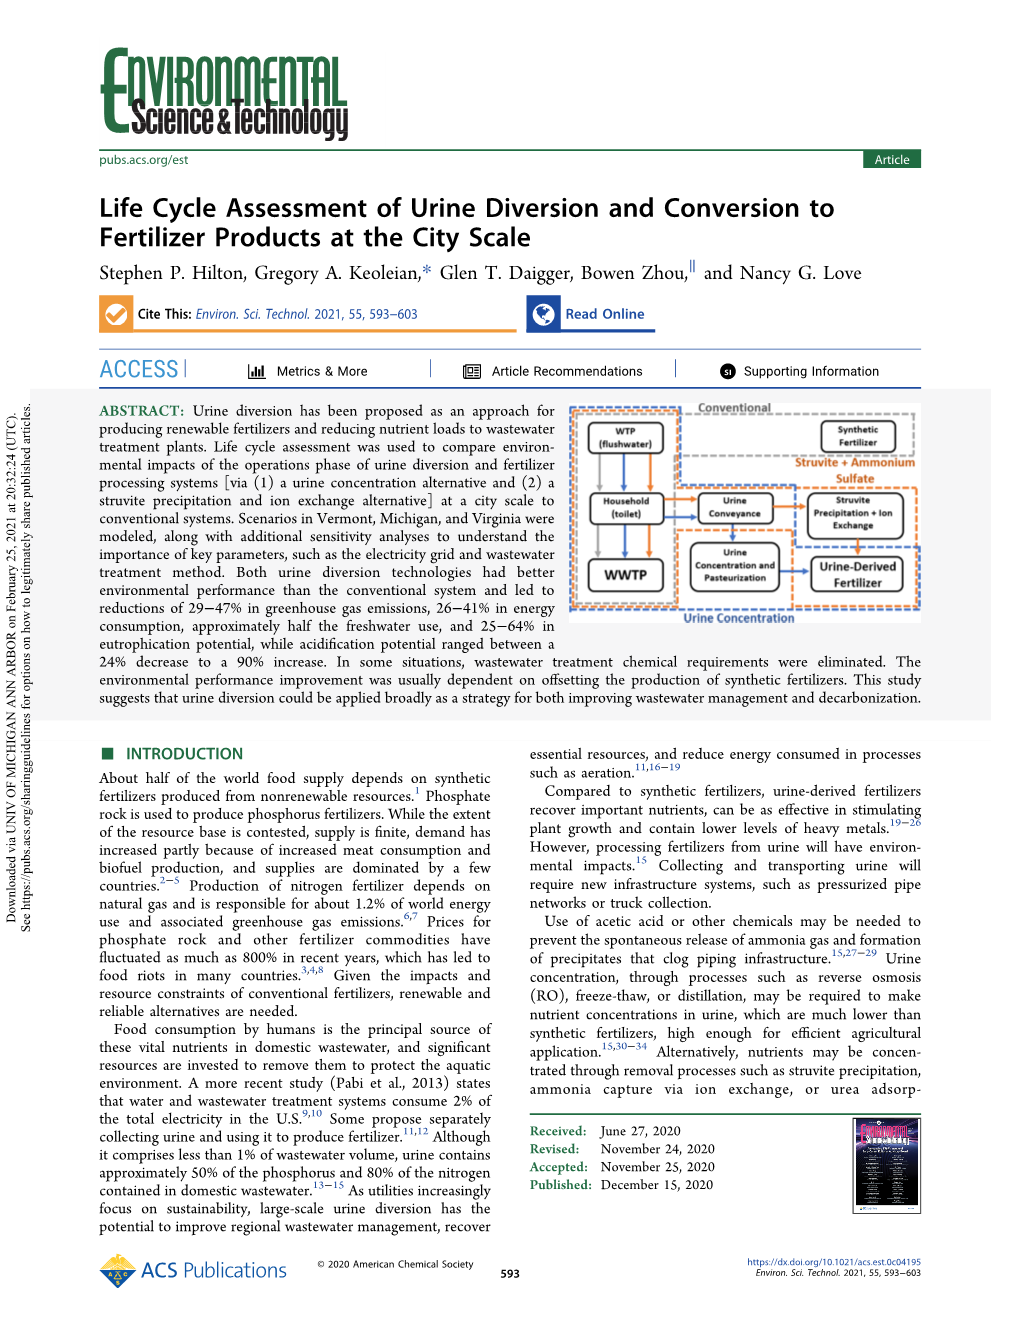 Life Cycle Assessment of Urine Diversion and Conversion to Fertilizer Products at the City Scale ∥ Stephen P